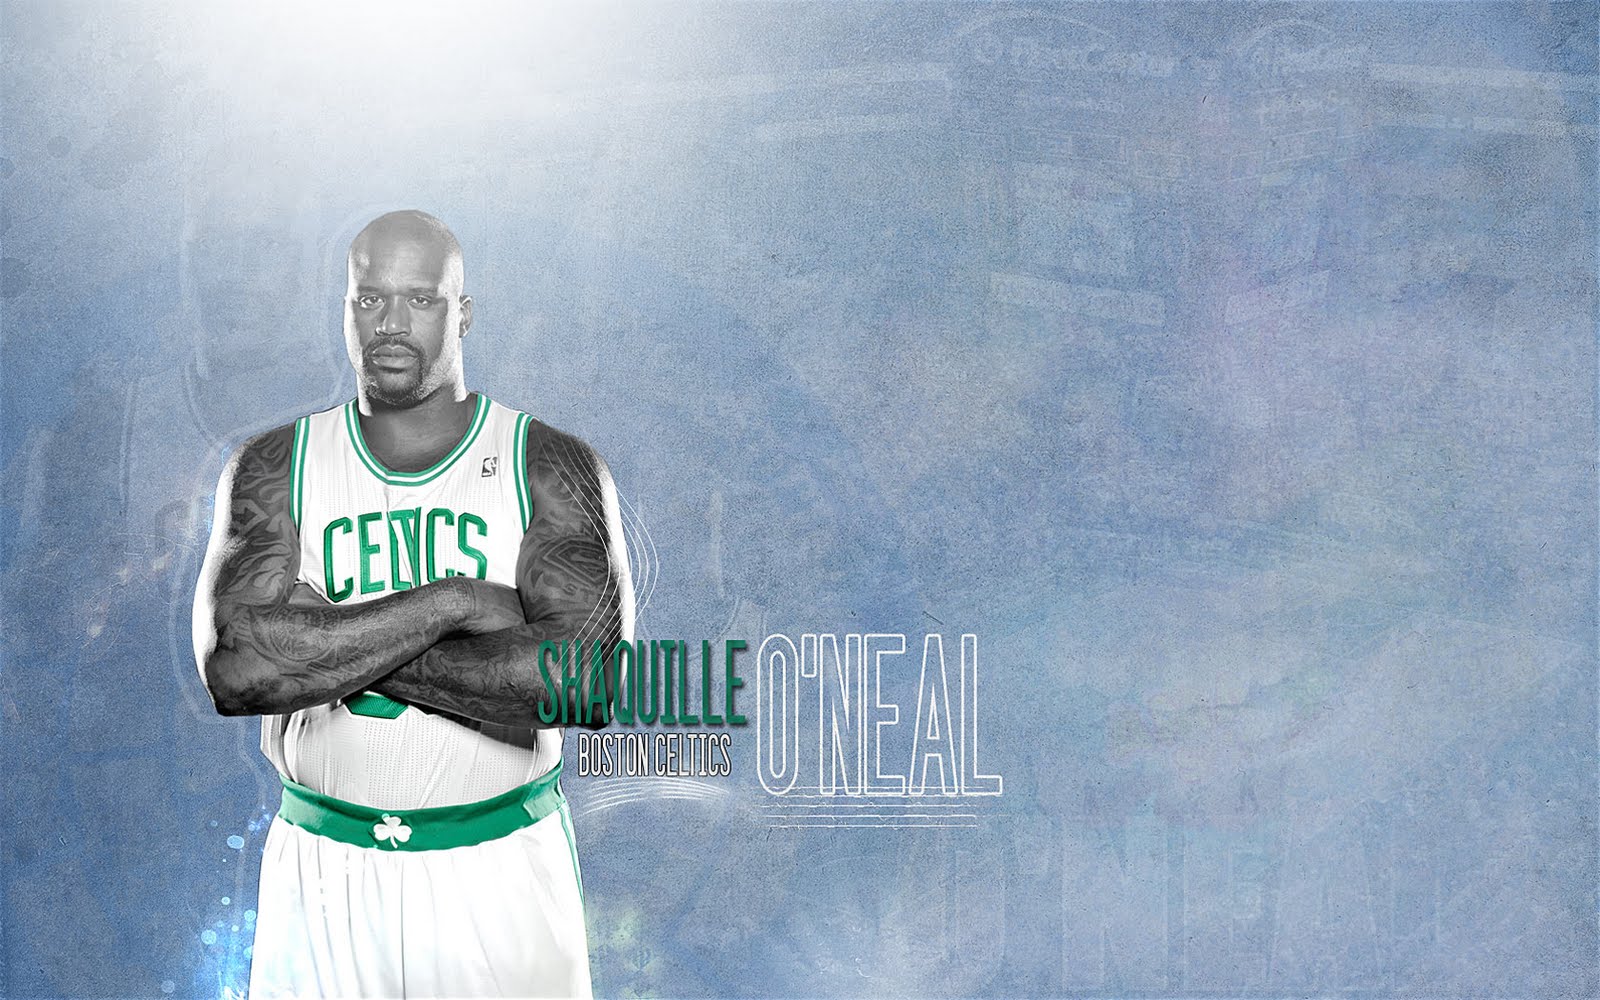 Shaquille O Neal Professional Basketball Player Legend